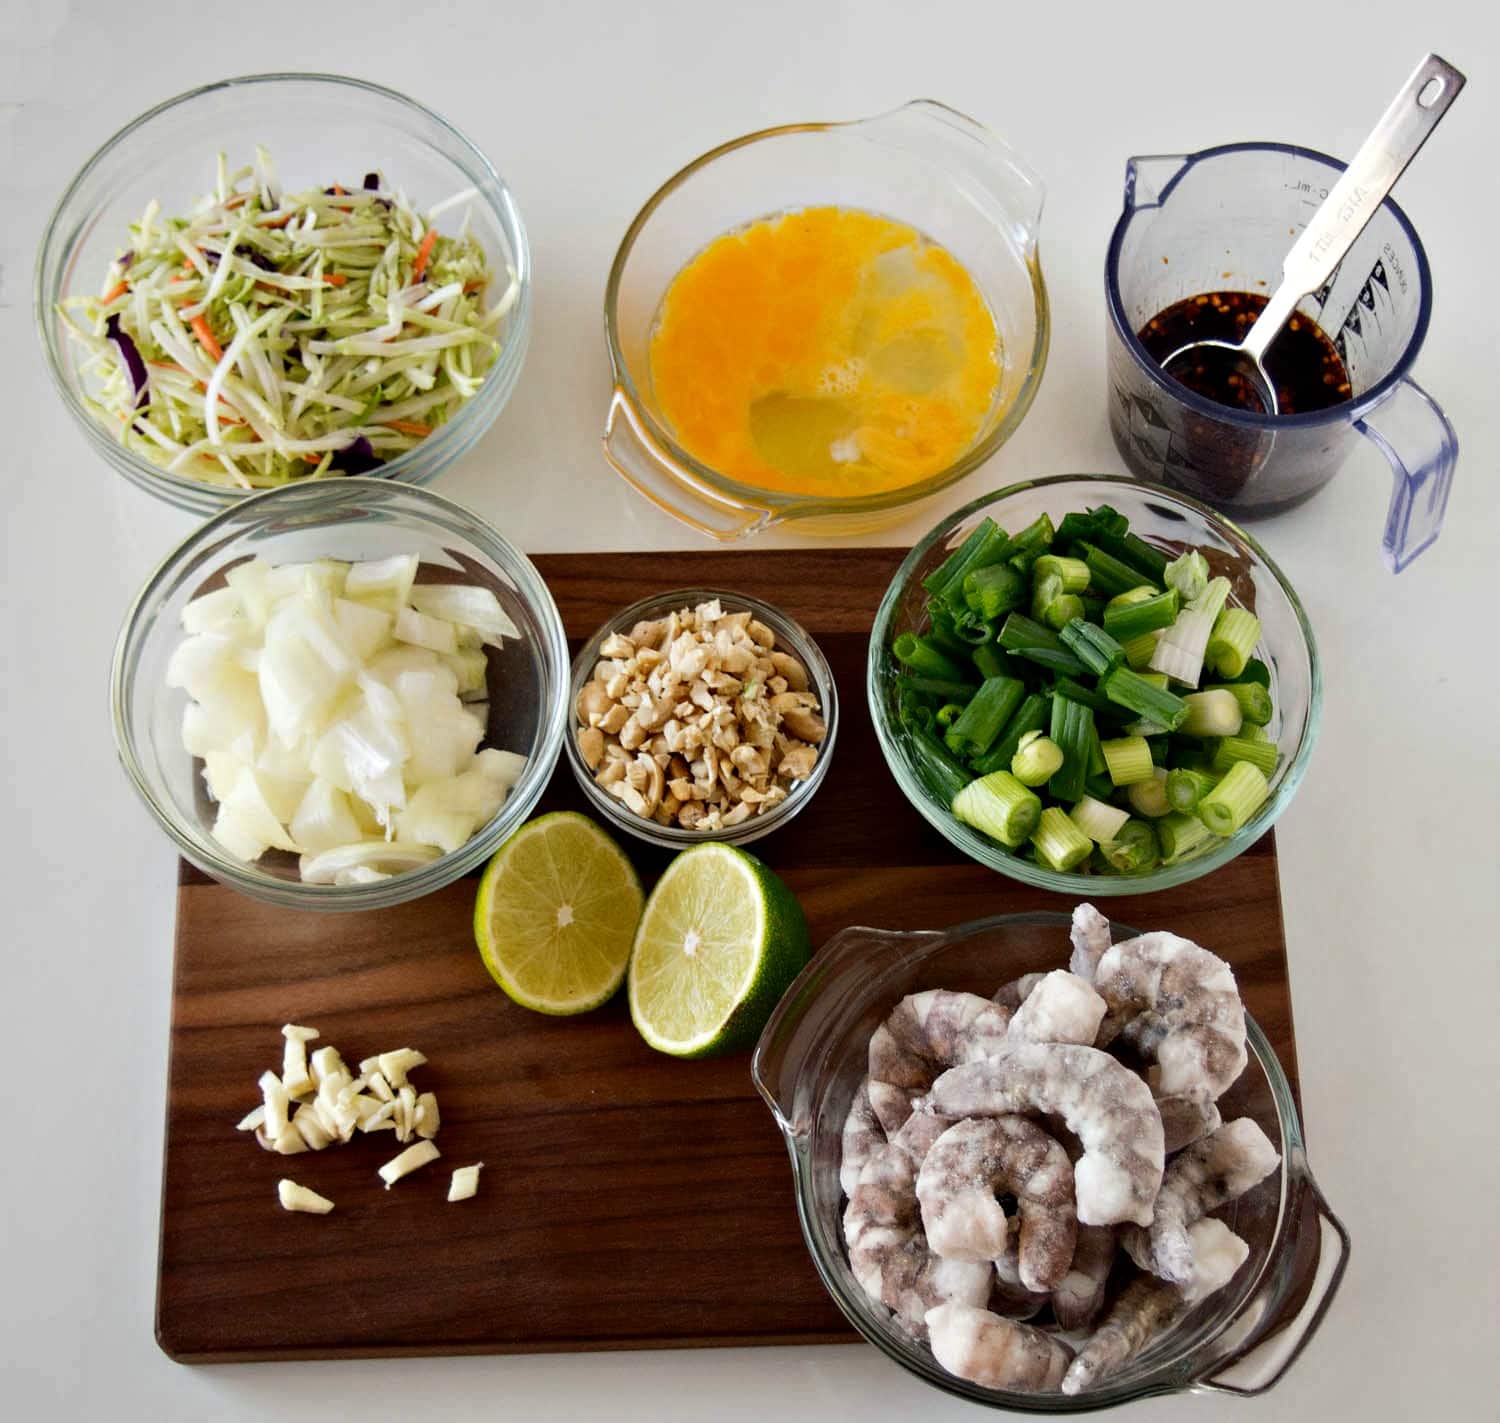 The ingredients for thai fried rice on a cutting board.